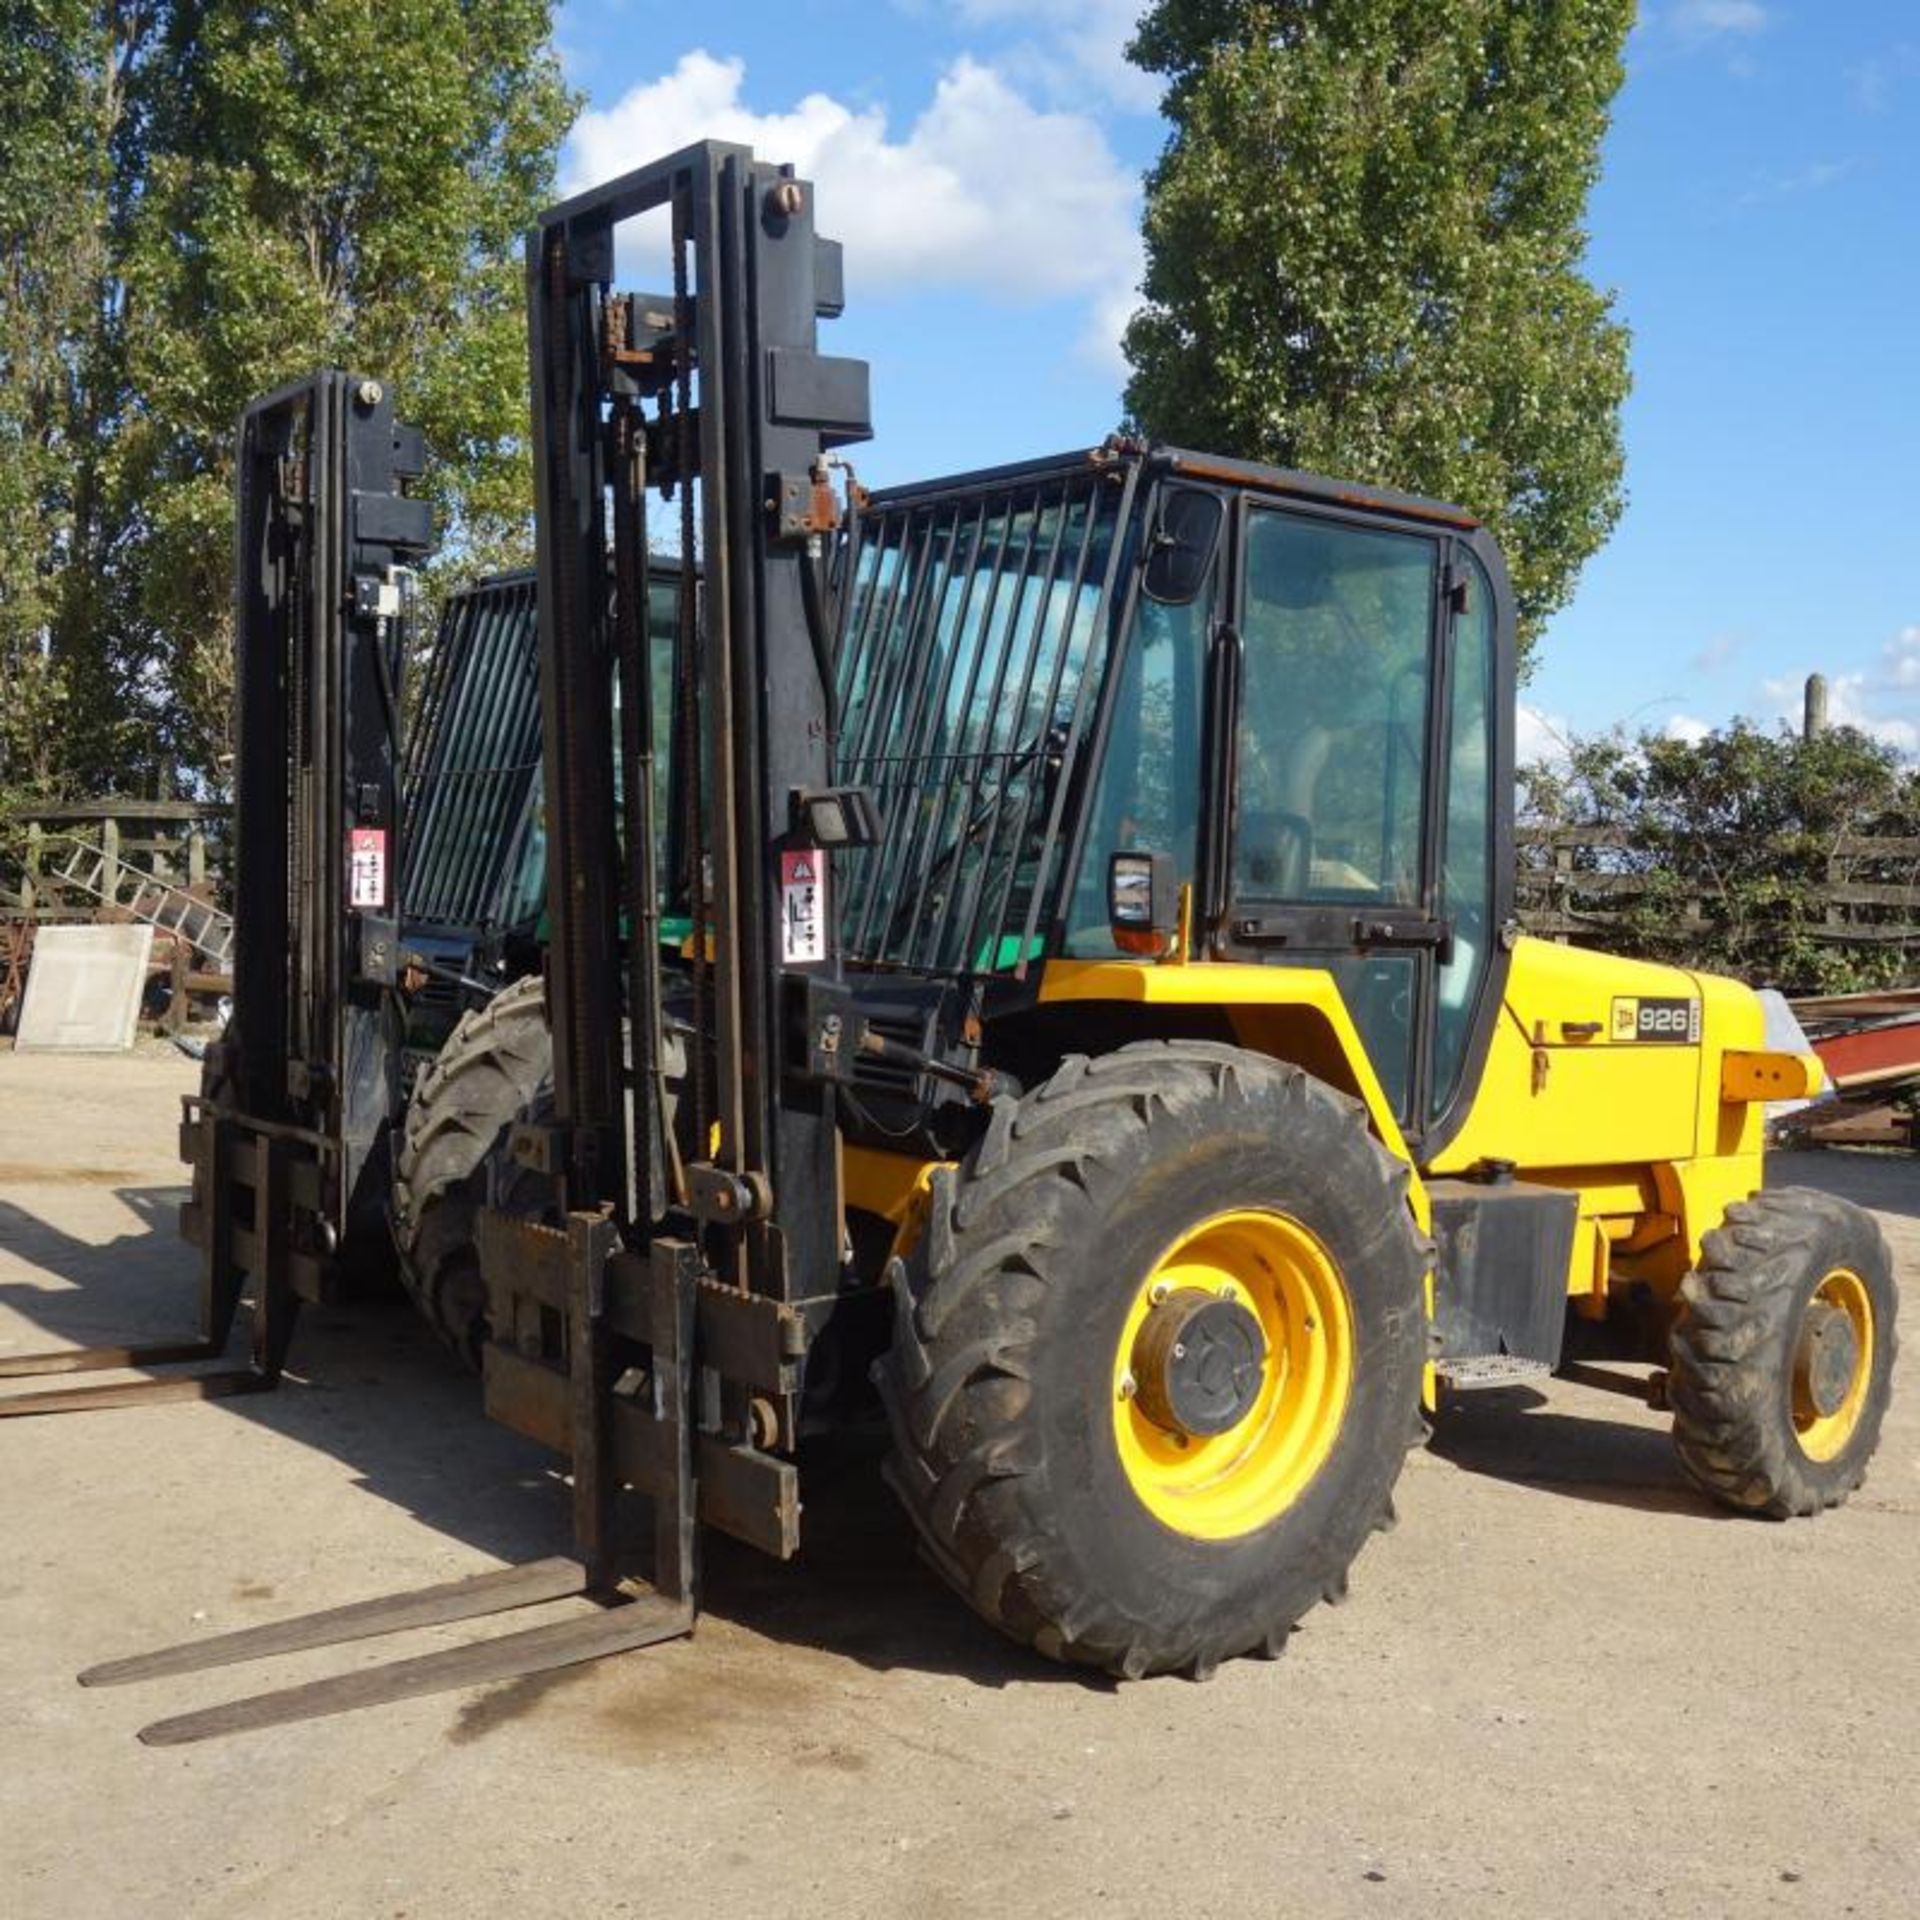 2008 JCB 926 4x4 Forklift (Yellow), 6884 Hours From New - Image 3 of 10